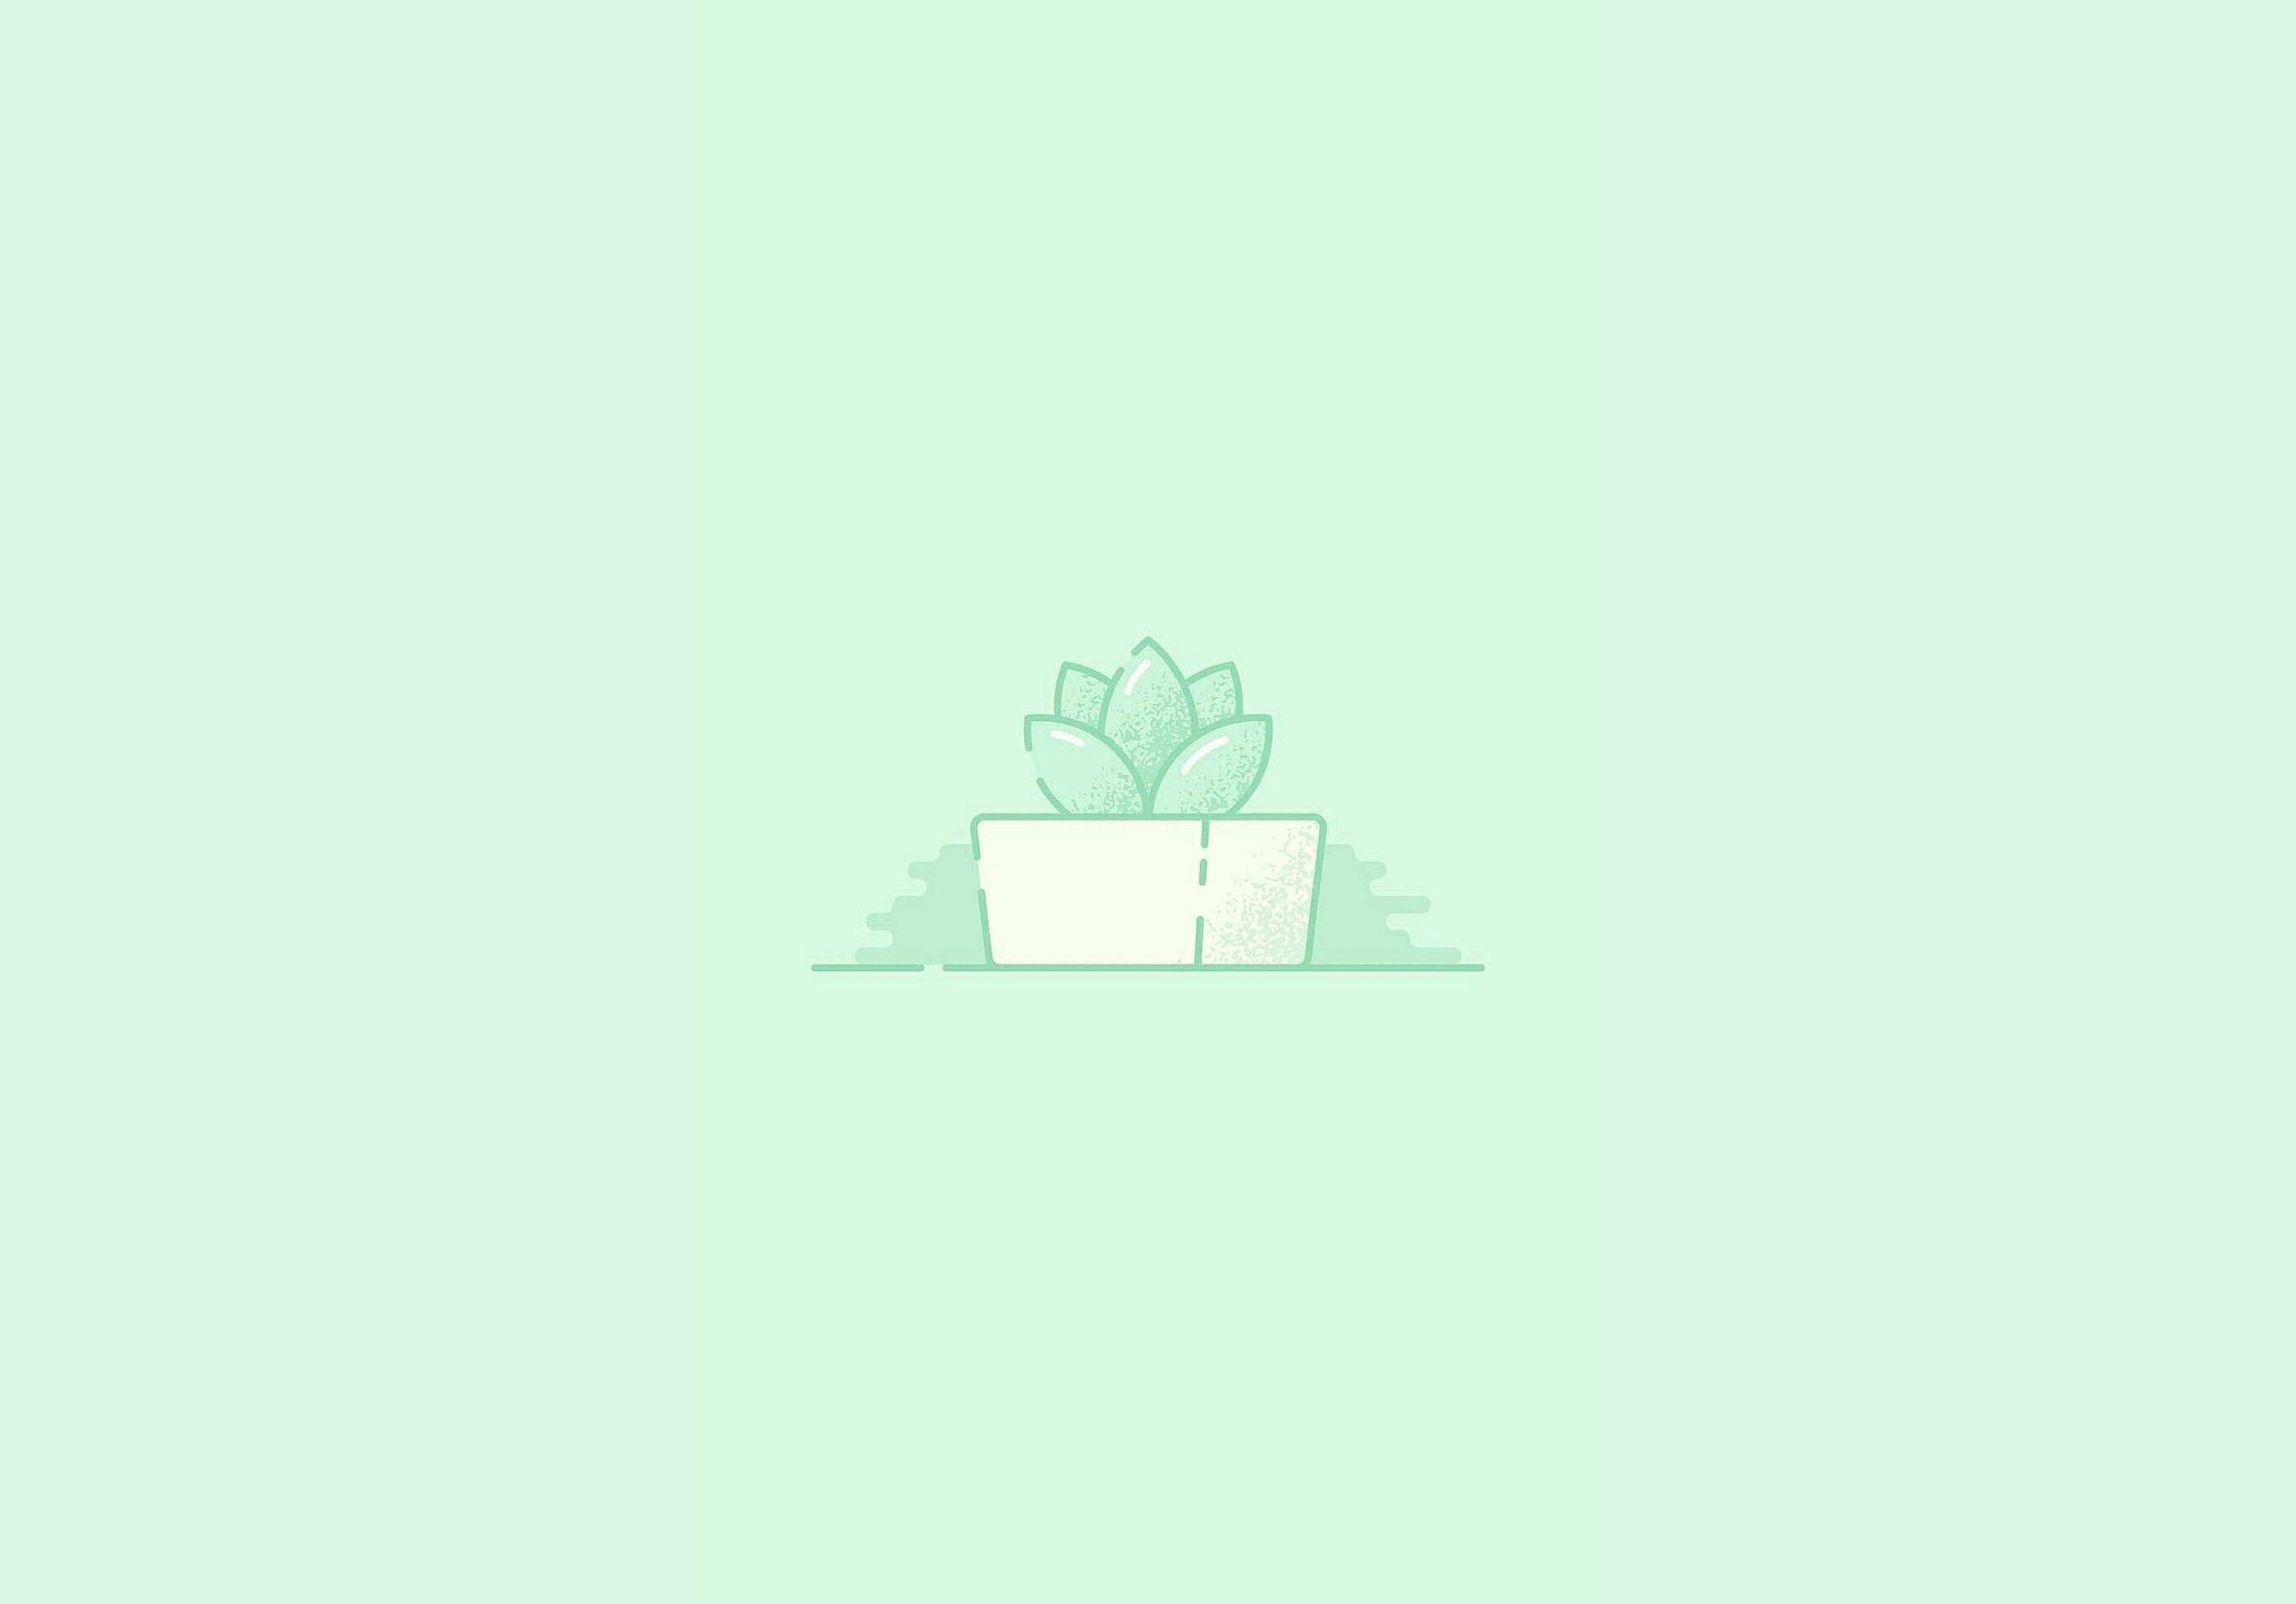 A potted plant on a green background - IPad, green, succulent, funny, mint green